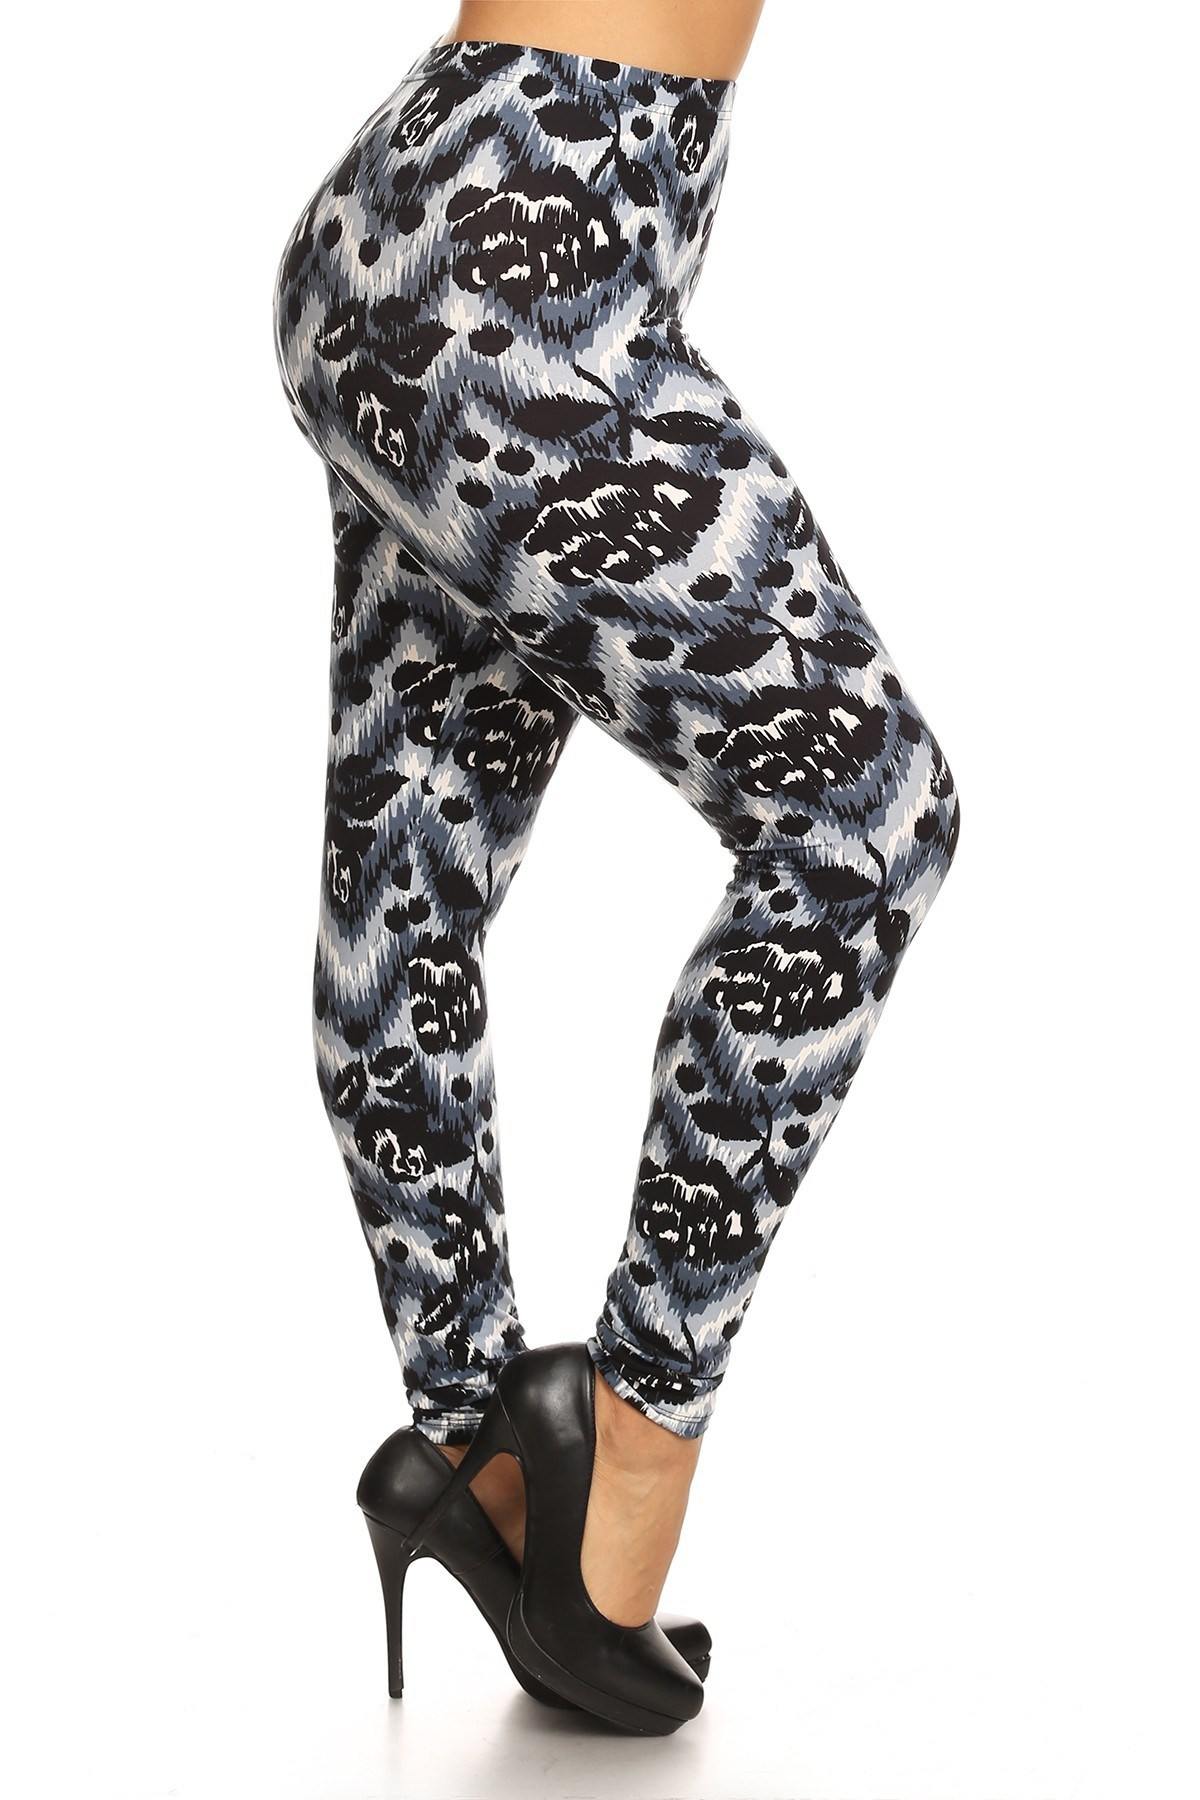 Abstract Print, Full Length Leggings In A Slim Fitting Style With A Banded High Waist - Pearlara